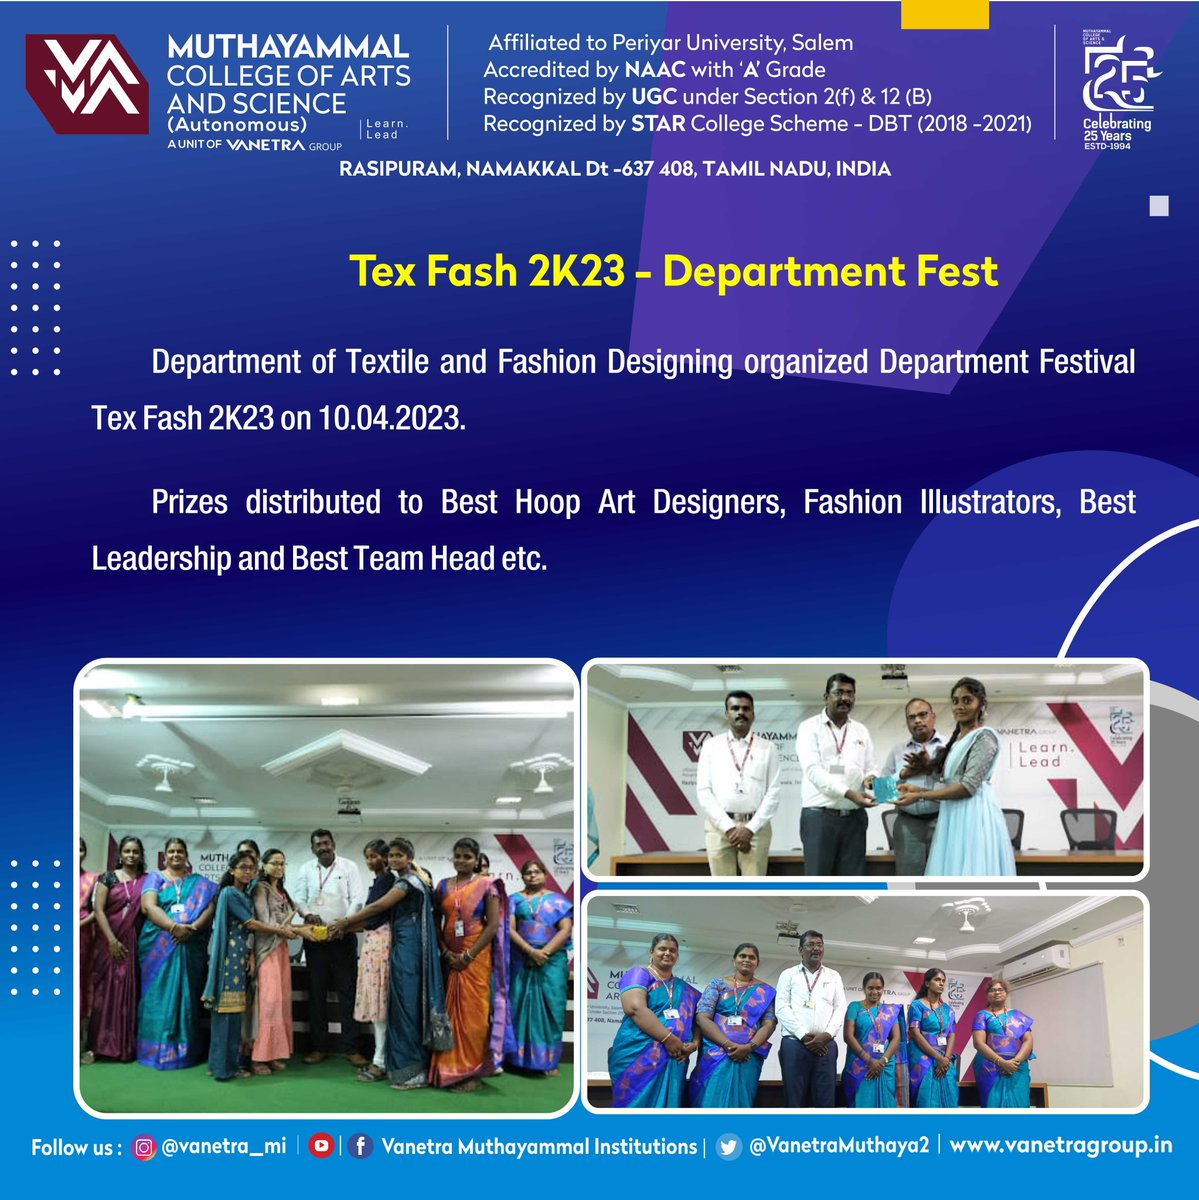 Department of Textile and Fashion Designing organised TEX FASH 2K23 - Department Fest on 10.04.2023.
#textile #textiles #textileart #textiledesign #textilepattern #textileprinting #TFD #tfd #fashion #fashionstyle #fashiontrends #fashiondesigner #fashionable #tex #texture #texfash